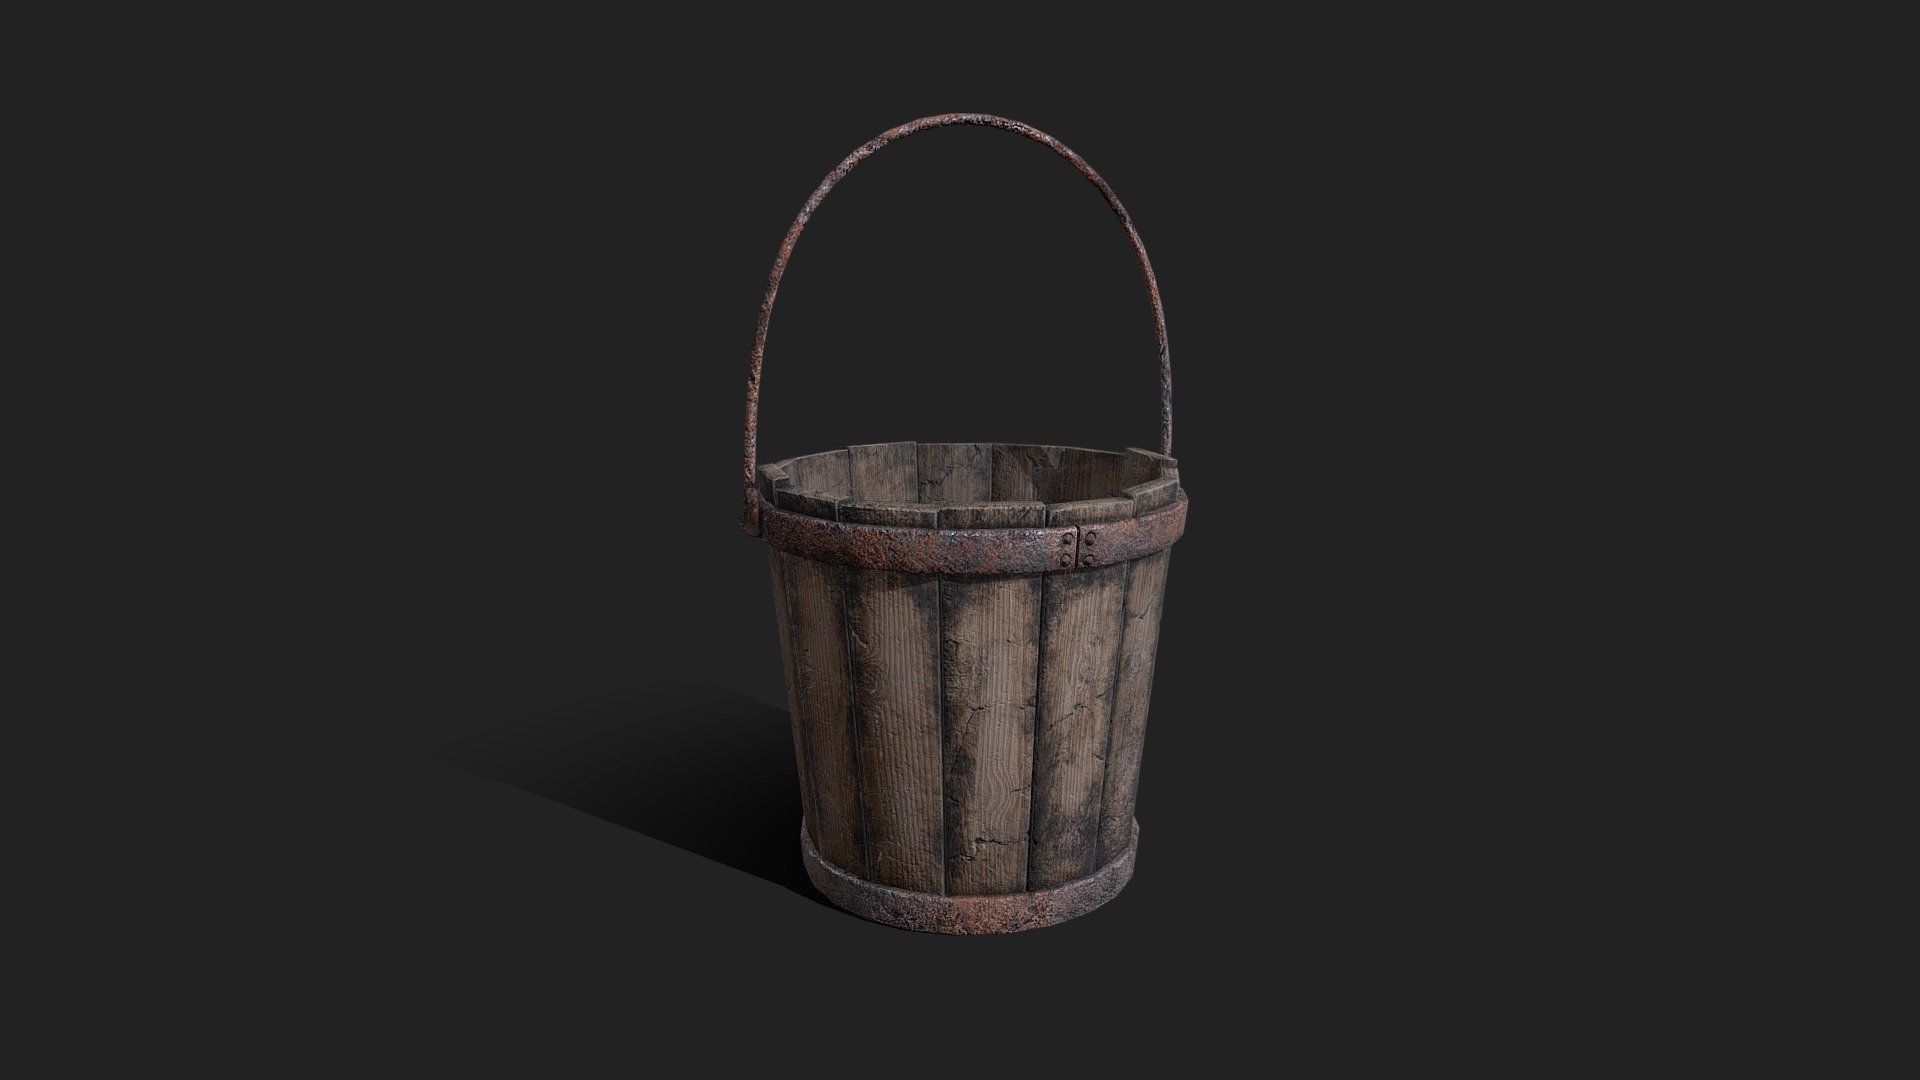 2048x2048 texture packs (PBR Metal Rough, Unity HDRP, Unity Standard Metallic and UE):

PBR Metal Rough: BaseColor, AO, Height, Normal, Roughness and Metallic;

Unity HDRP: BaseColor, MaskMap, Normal;

Unity Standard Metallic: AlbedoTransparency, MetallicSmoothness, Normal;

Unreal Engine: BaseColor, Normal, OcclusionRoughnessMetallic;

The package also has the .fbx, .obj and .dae file 3d model